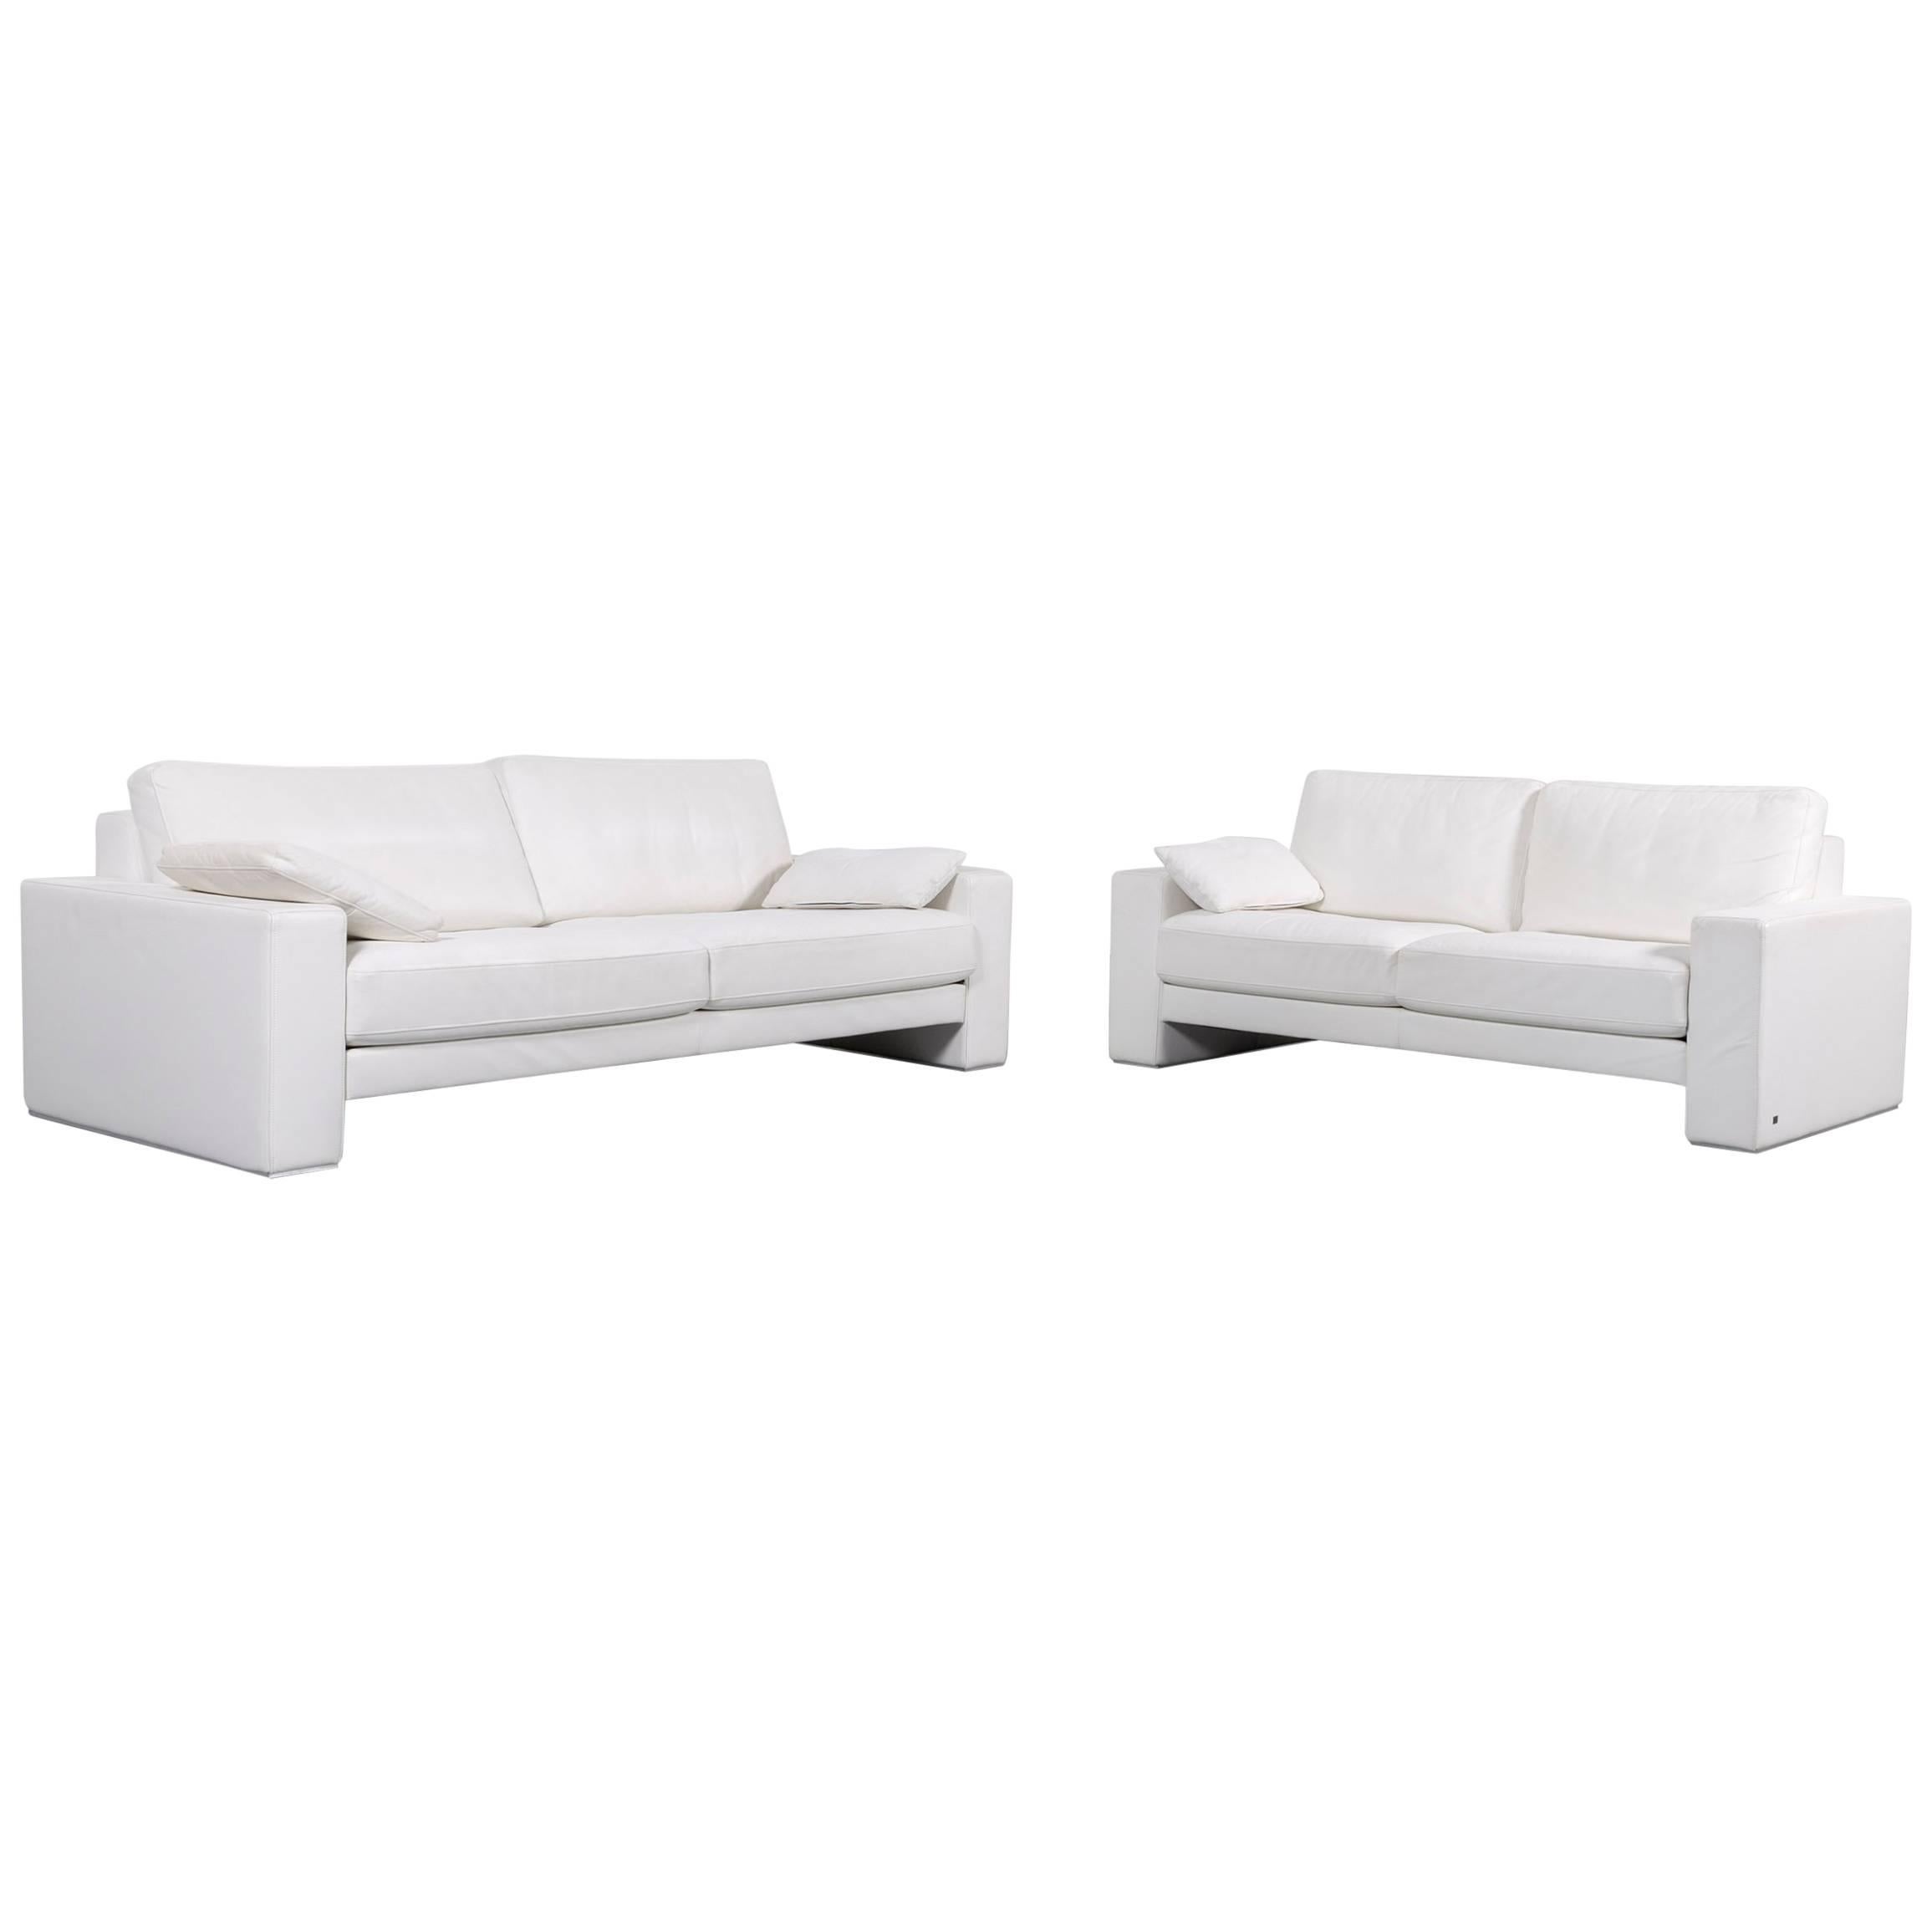 Rolf Benz Ego Leather Sofa-Set White Three- and Two-Seat